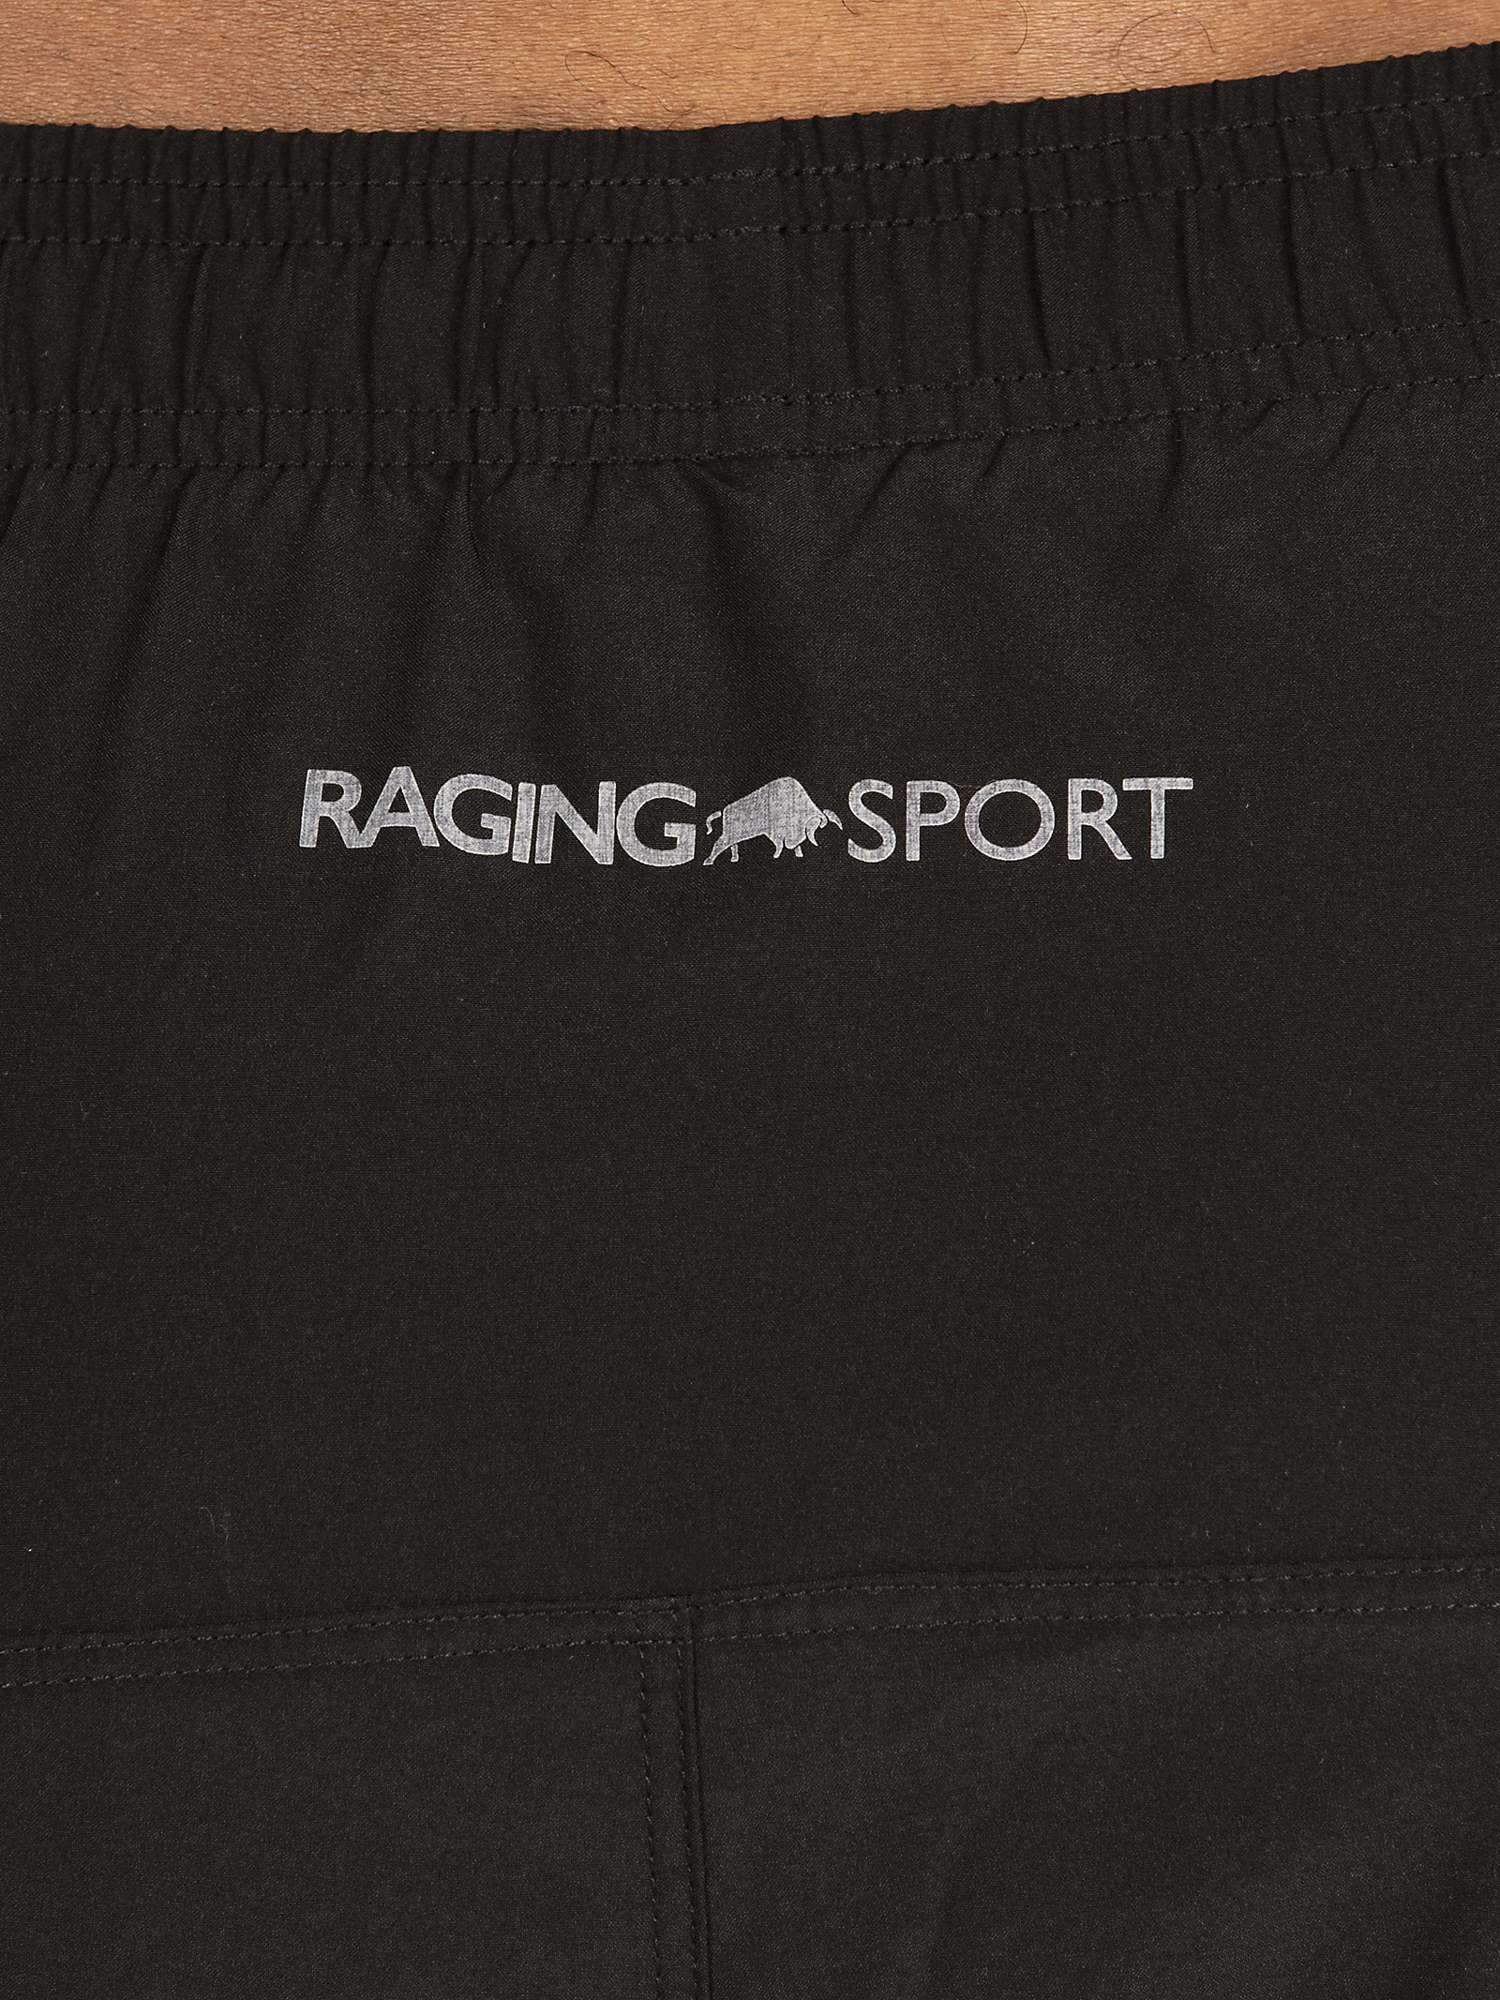 Buy Raging Bull Performance 2-in-1 Gym Shorts Online at johnlewis.com